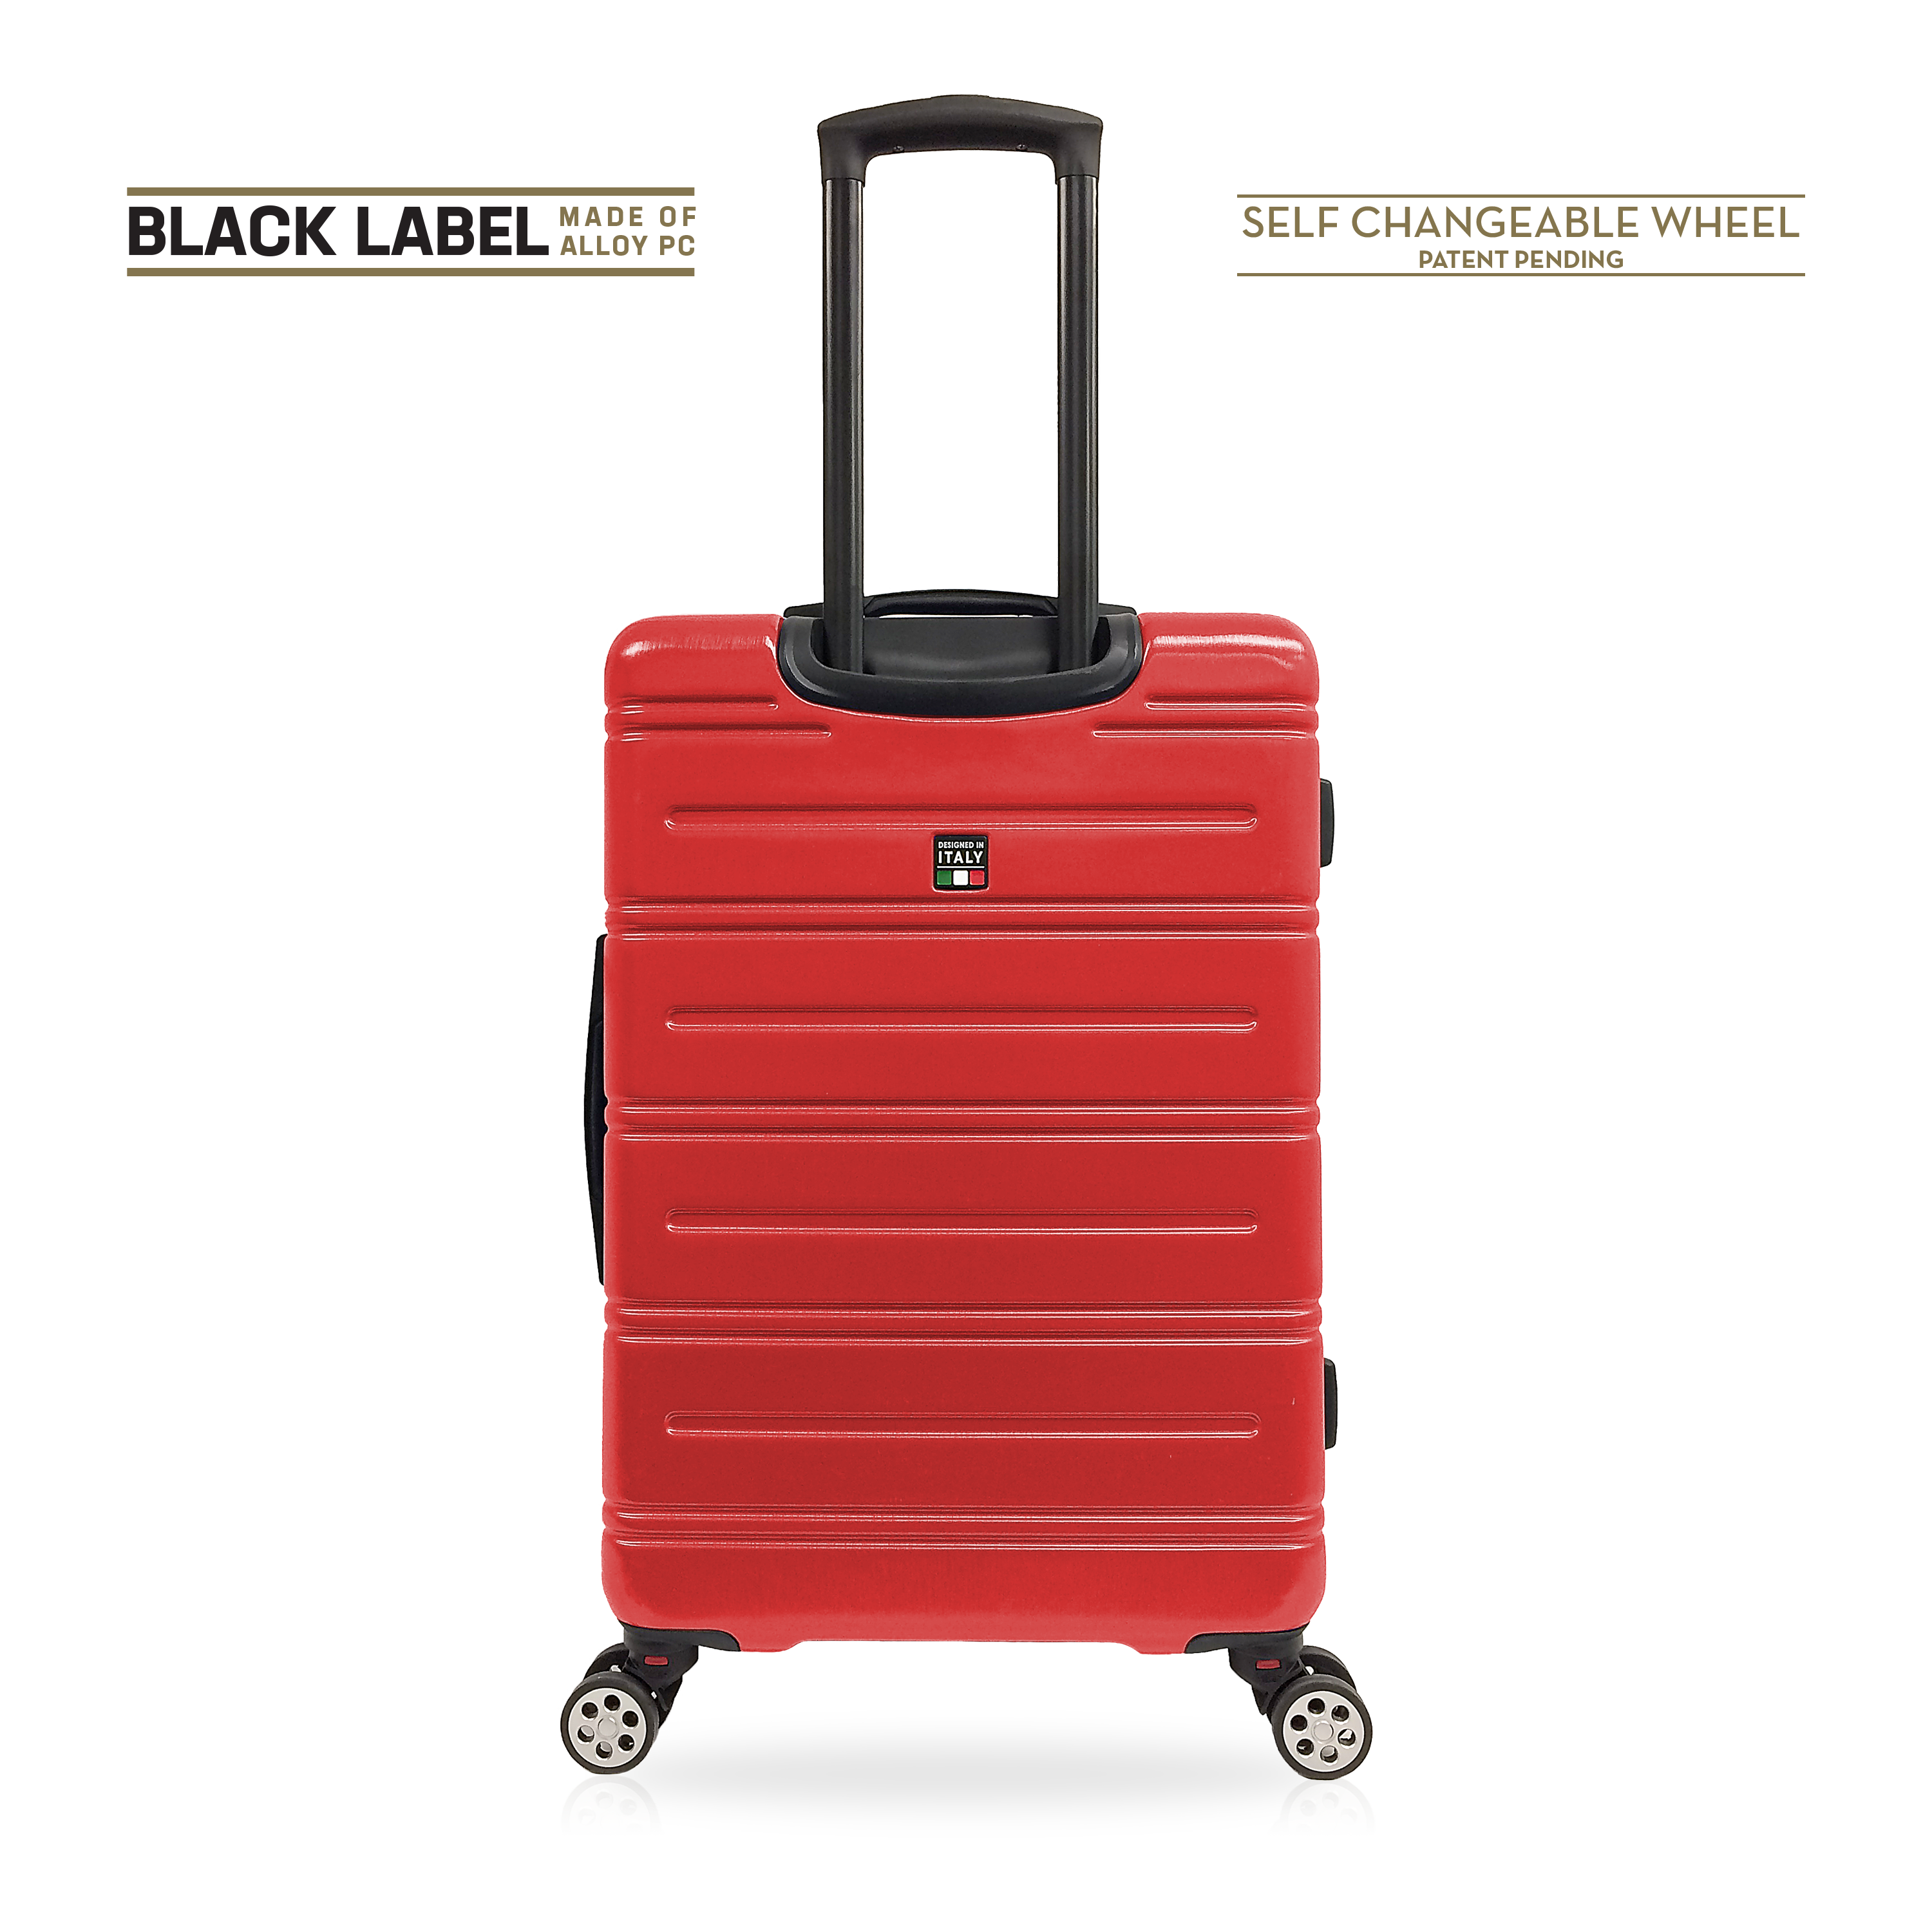 TUCCI Italy LETIZIA 28" Lightweight Spinner Suitcase